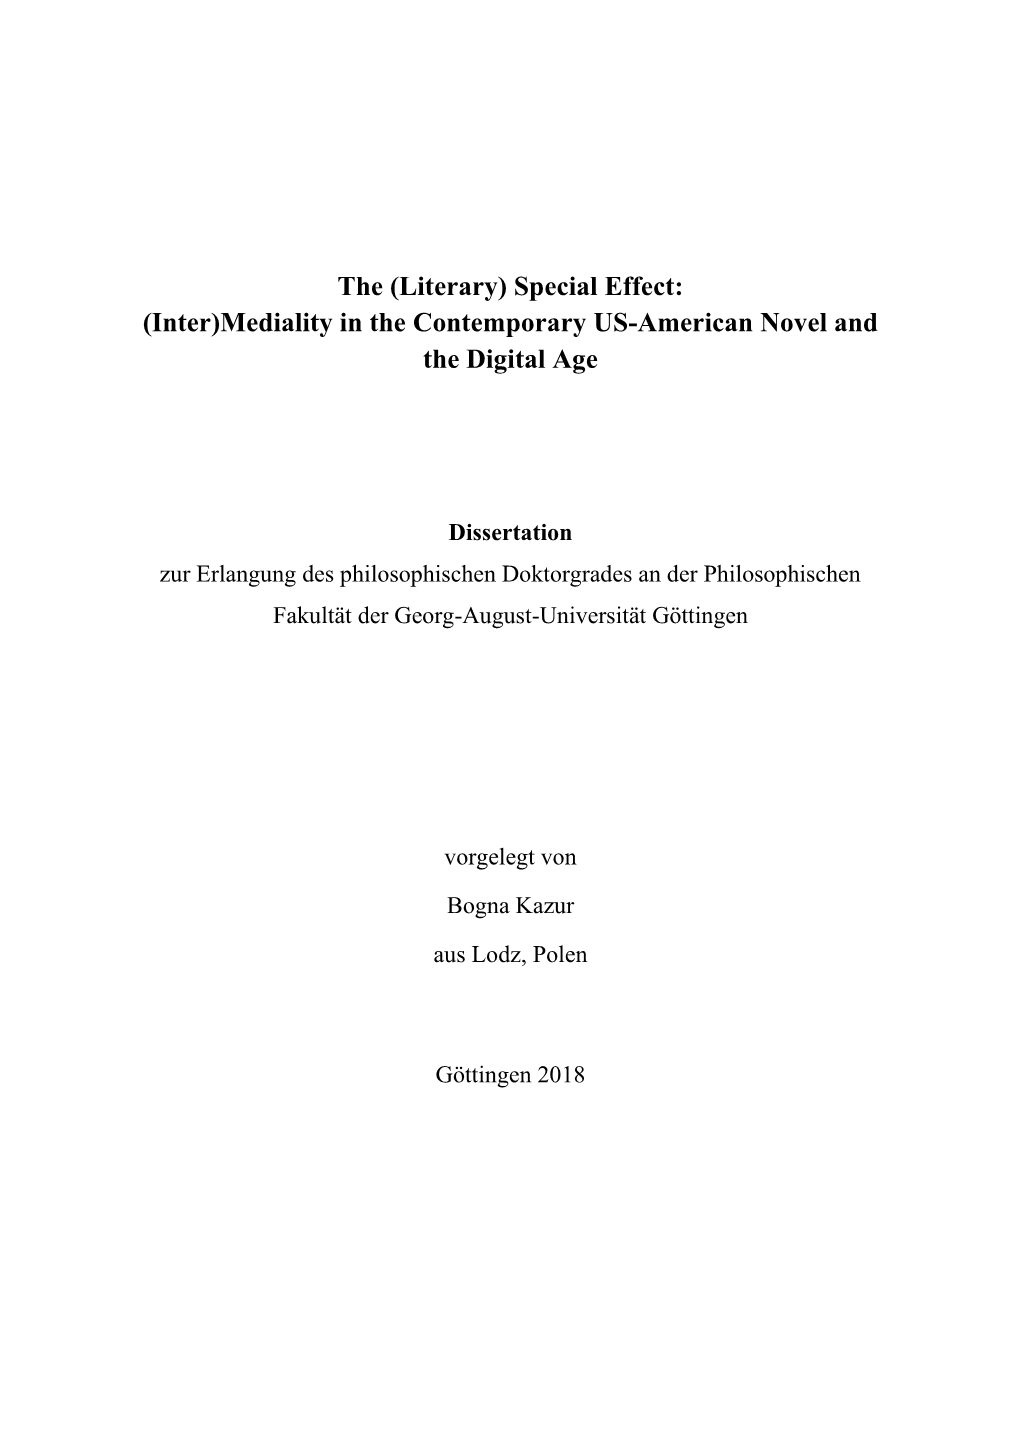 (Literary) Special Effect: (Inter)Mediality in the Contemporary US-American Novel and the Digital Age